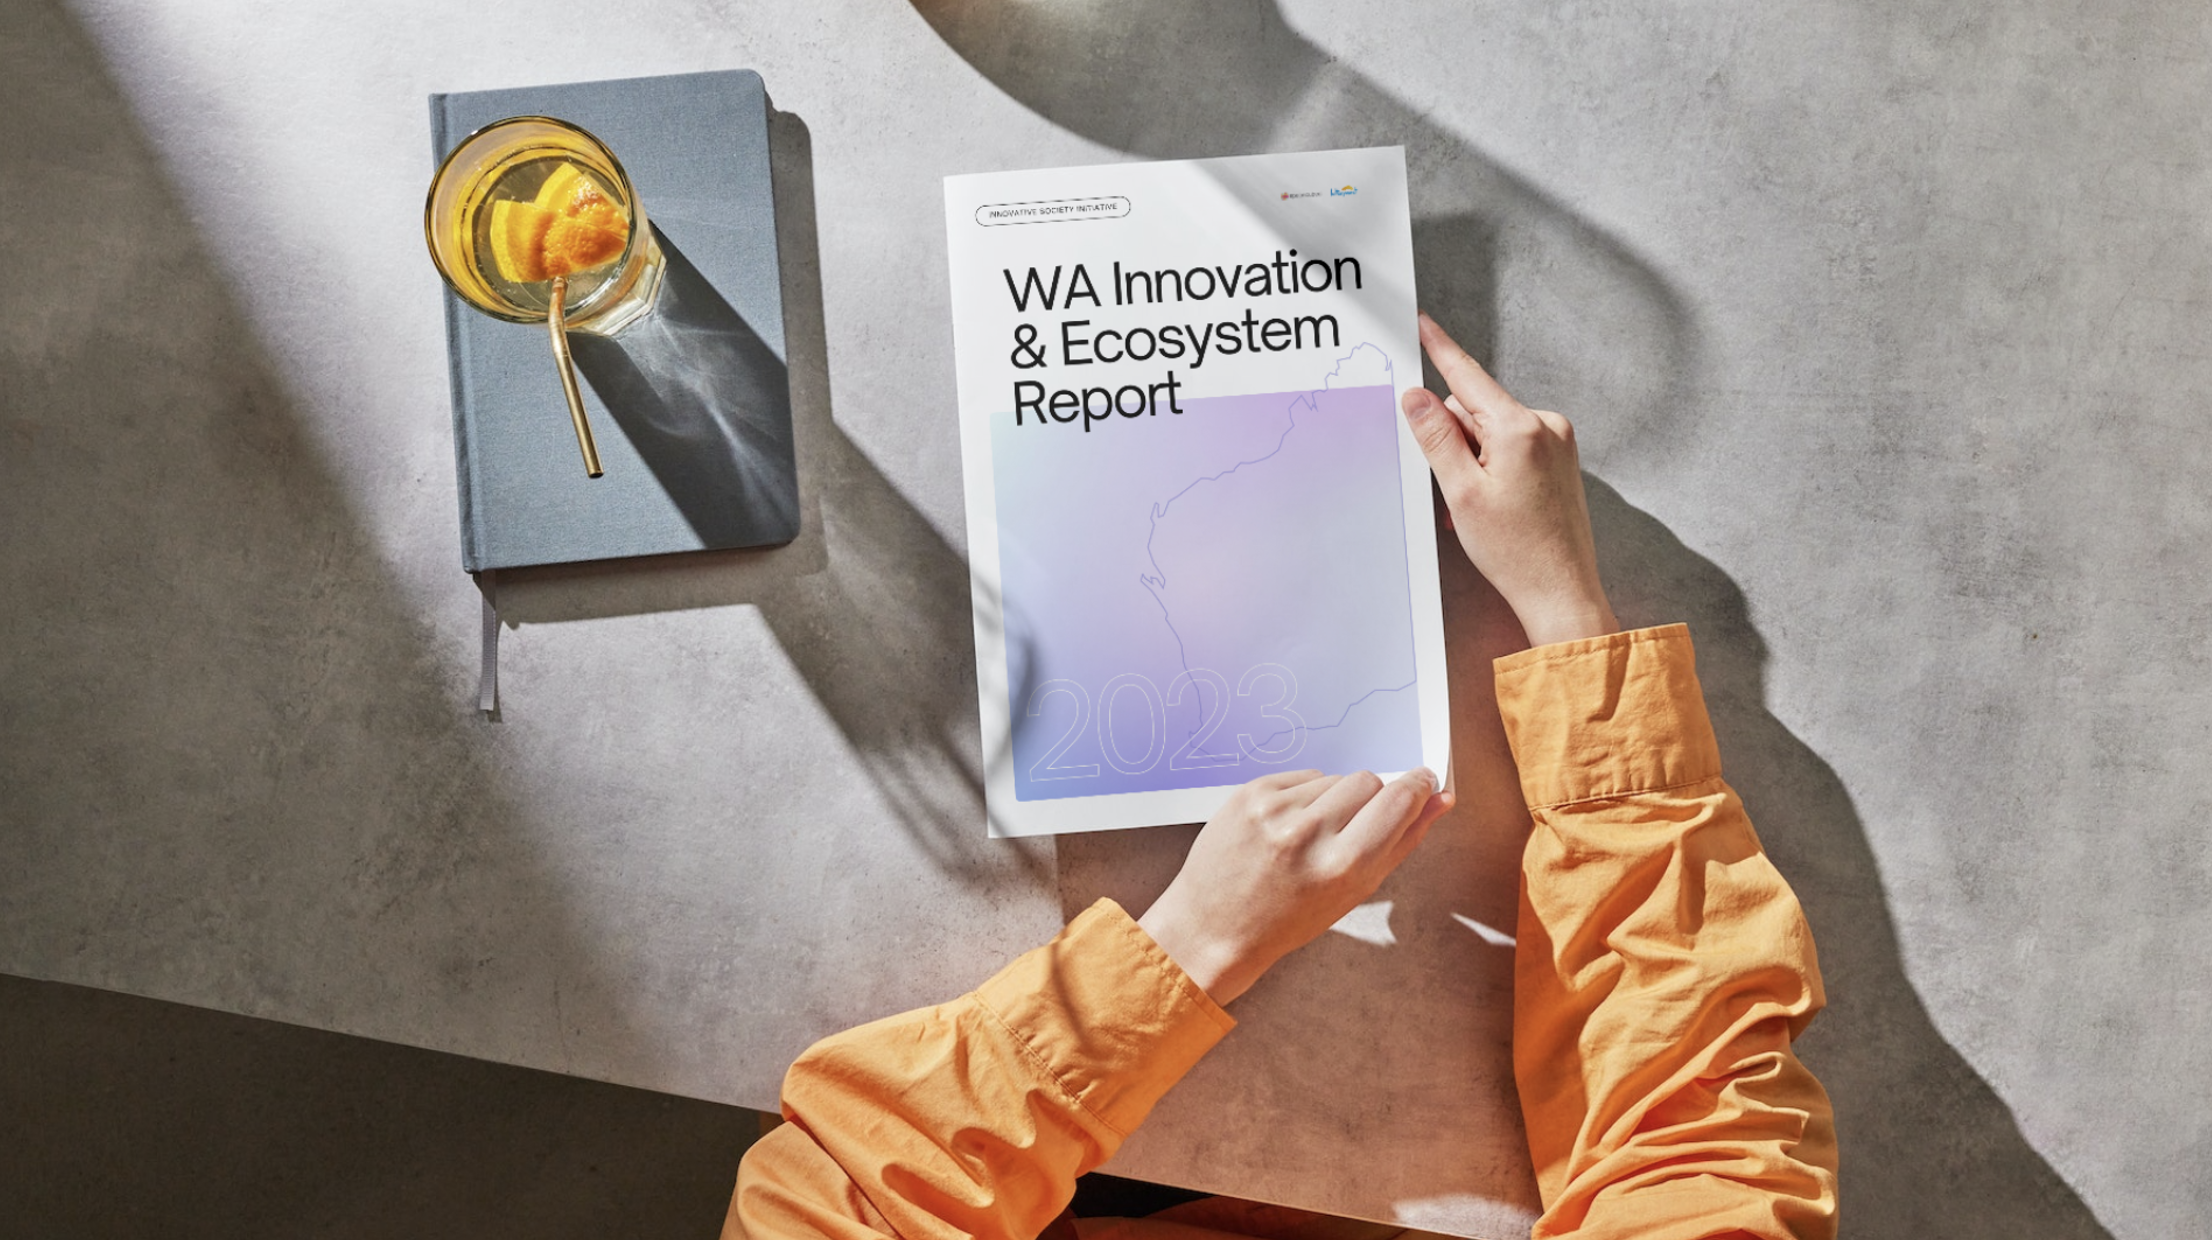 Innovative Society Initiative, supported by Lotterywest, launches WA Innovation & Ecosystem Report at 2023 Congress